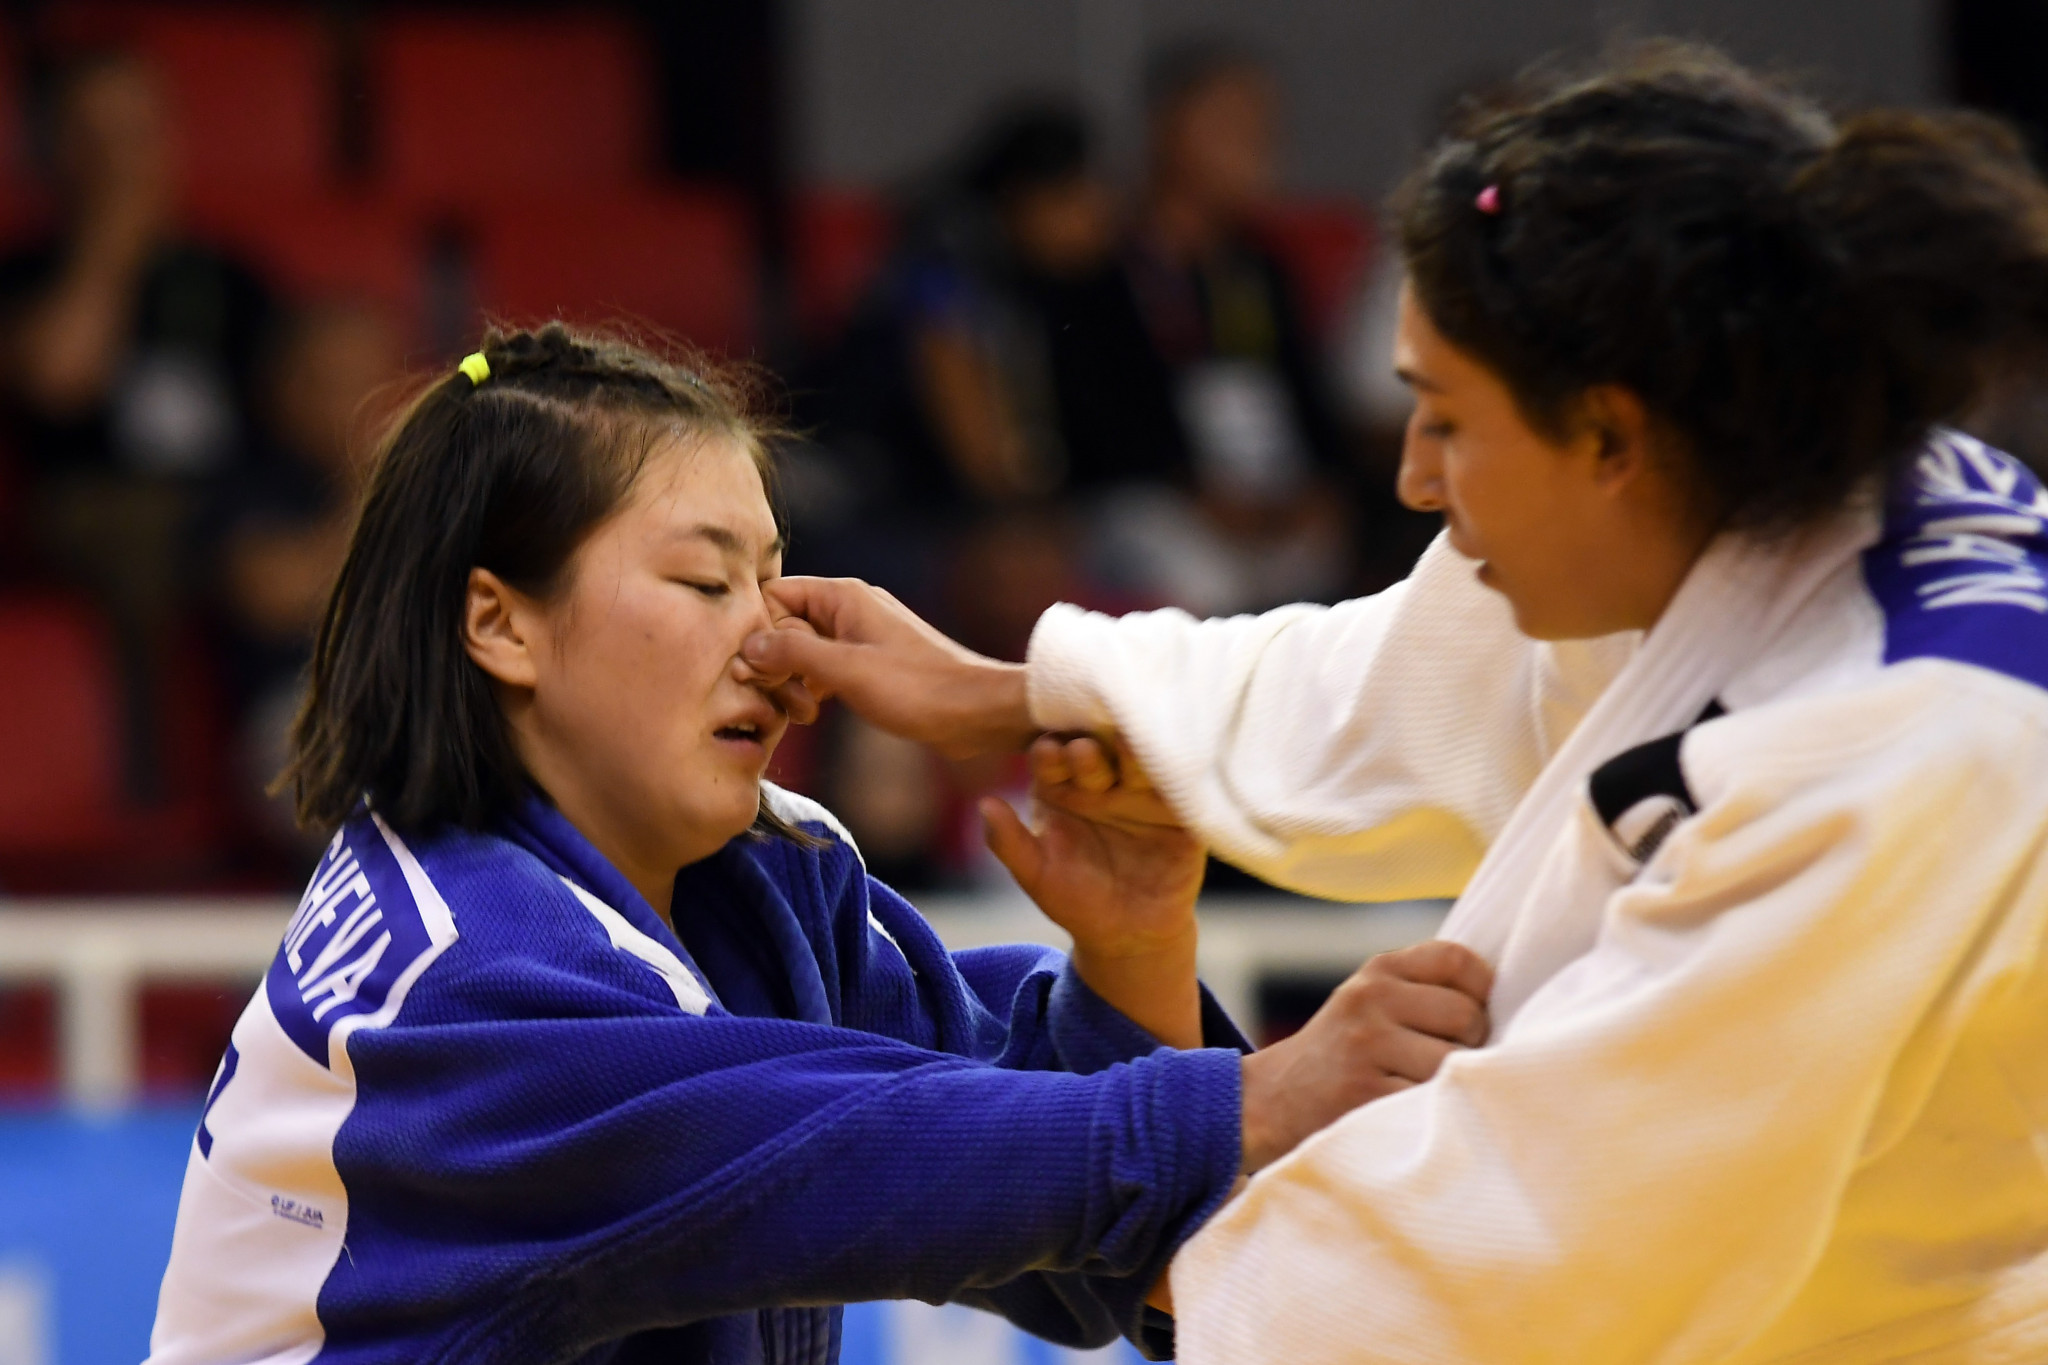 Judoka tried all sorts of moves to gain the upperhand on their opponents ©Konya 2021